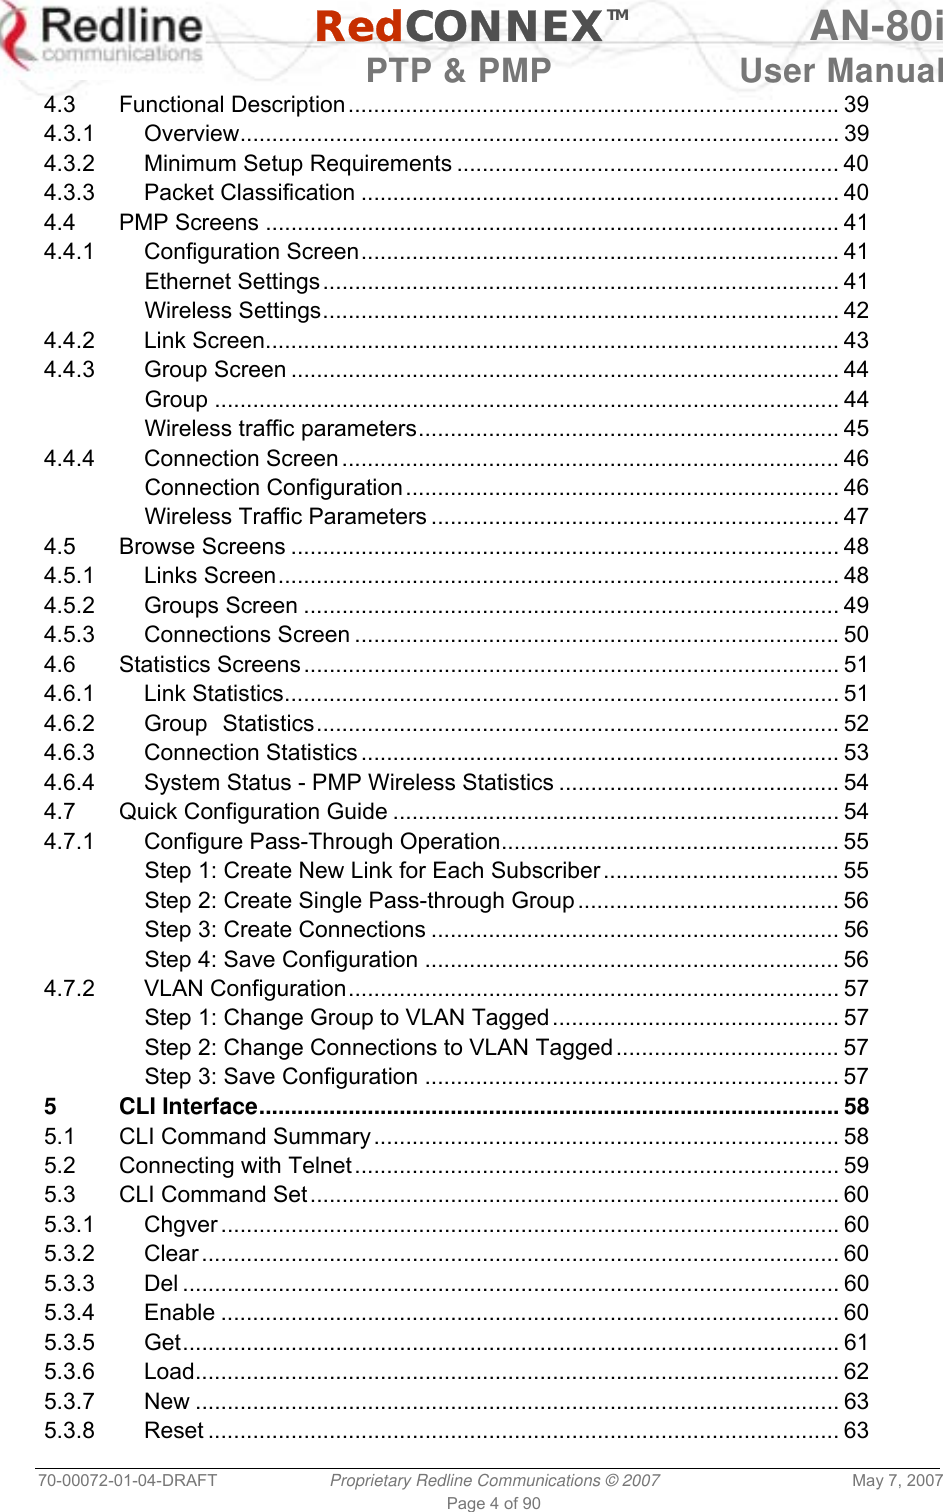   RedCONNEXTM AN-80i   PTP &amp; PMP  User Manual 70-00072-01-04-DRAFT  Proprietary Redline Communications © 2007  May 7, 2007 Page 4 of 90 4.3 Functional Description............................................................................. 39 4.3.1 Overview.............................................................................................. 39 4.3.2 Minimum Setup Requirements ............................................................ 40 4.3.3 Packet Classification ........................................................................... 40 4.4 PMP Screens .......................................................................................... 41 4.4.1 Configuration Screen........................................................................... 41 Ethernet Settings................................................................................. 41 Wireless Settings................................................................................. 42 4.4.2 Link Screen.......................................................................................... 43 4.4.3 Group Screen ...................................................................................... 44 Group .................................................................................................. 44 Wireless traffic parameters.................................................................. 45 4.4.4 Connection Screen .............................................................................. 46 Connection Configuration.................................................................... 46 Wireless Traffic Parameters ................................................................ 47 4.5 Browse Screens ...................................................................................... 48 4.5.1 Links Screen........................................................................................ 48 4.5.2 Groups Screen .................................................................................... 49 4.5.3 Connections Screen ............................................................................ 50 4.6 Statistics Screens.................................................................................... 51 4.6.1 Link Statistics....................................................................................... 51 4.6.2 Group Statistics.................................................................................. 52 4.6.3 Connection Statistics ........................................................................... 53 4.6.4 System Status - PMP Wireless Statistics ............................................ 54 4.7 Quick Configuration Guide ...................................................................... 54 4.7.1 Configure Pass-Through Operation..................................................... 55 Step 1: Create New Link for Each Subscriber..................................... 55 Step 2: Create Single Pass-through Group......................................... 56 Step 3: Create Connections ................................................................ 56 Step 4: Save Configuration ................................................................. 56 4.7.2 VLAN Configuration............................................................................. 57 Step 1: Change Group to VLAN Tagged............................................. 57 Step 2: Change Connections to VLAN Tagged................................... 57 Step 3: Save Configuration ................................................................. 57 5 CLI Interface........................................................................................... 58 5.1 CLI Command Summary......................................................................... 58 5.2 Connecting with Telnet............................................................................ 59 5.3 CLI Command Set................................................................................... 60 5.3.1 Chgver ................................................................................................. 60 5.3.2 Clear .................................................................................................... 60 5.3.3 Del ....................................................................................................... 60 5.3.4 Enable ................................................................................................. 60 5.3.5 Get....................................................................................................... 61 5.3.6 Load..................................................................................................... 62 5.3.7 New ..................................................................................................... 63 5.3.8 Reset ................................................................................................... 63 